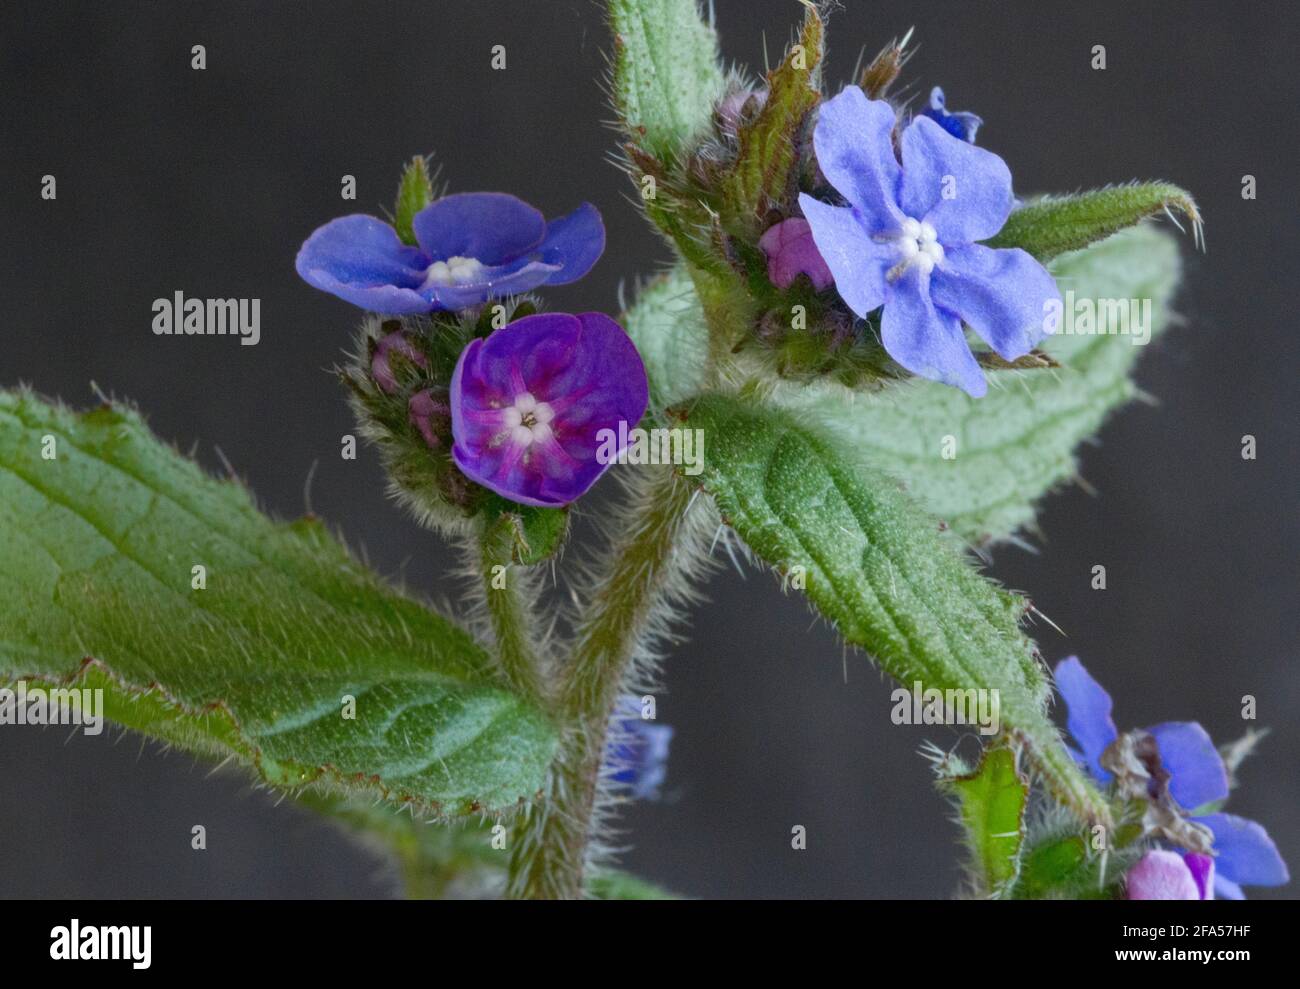 Introduced into the UK  from SW Europe, Green Alkanet is a spring flowering member of the borage family. They have a distinctive hairy stem and leaves Stock Photo